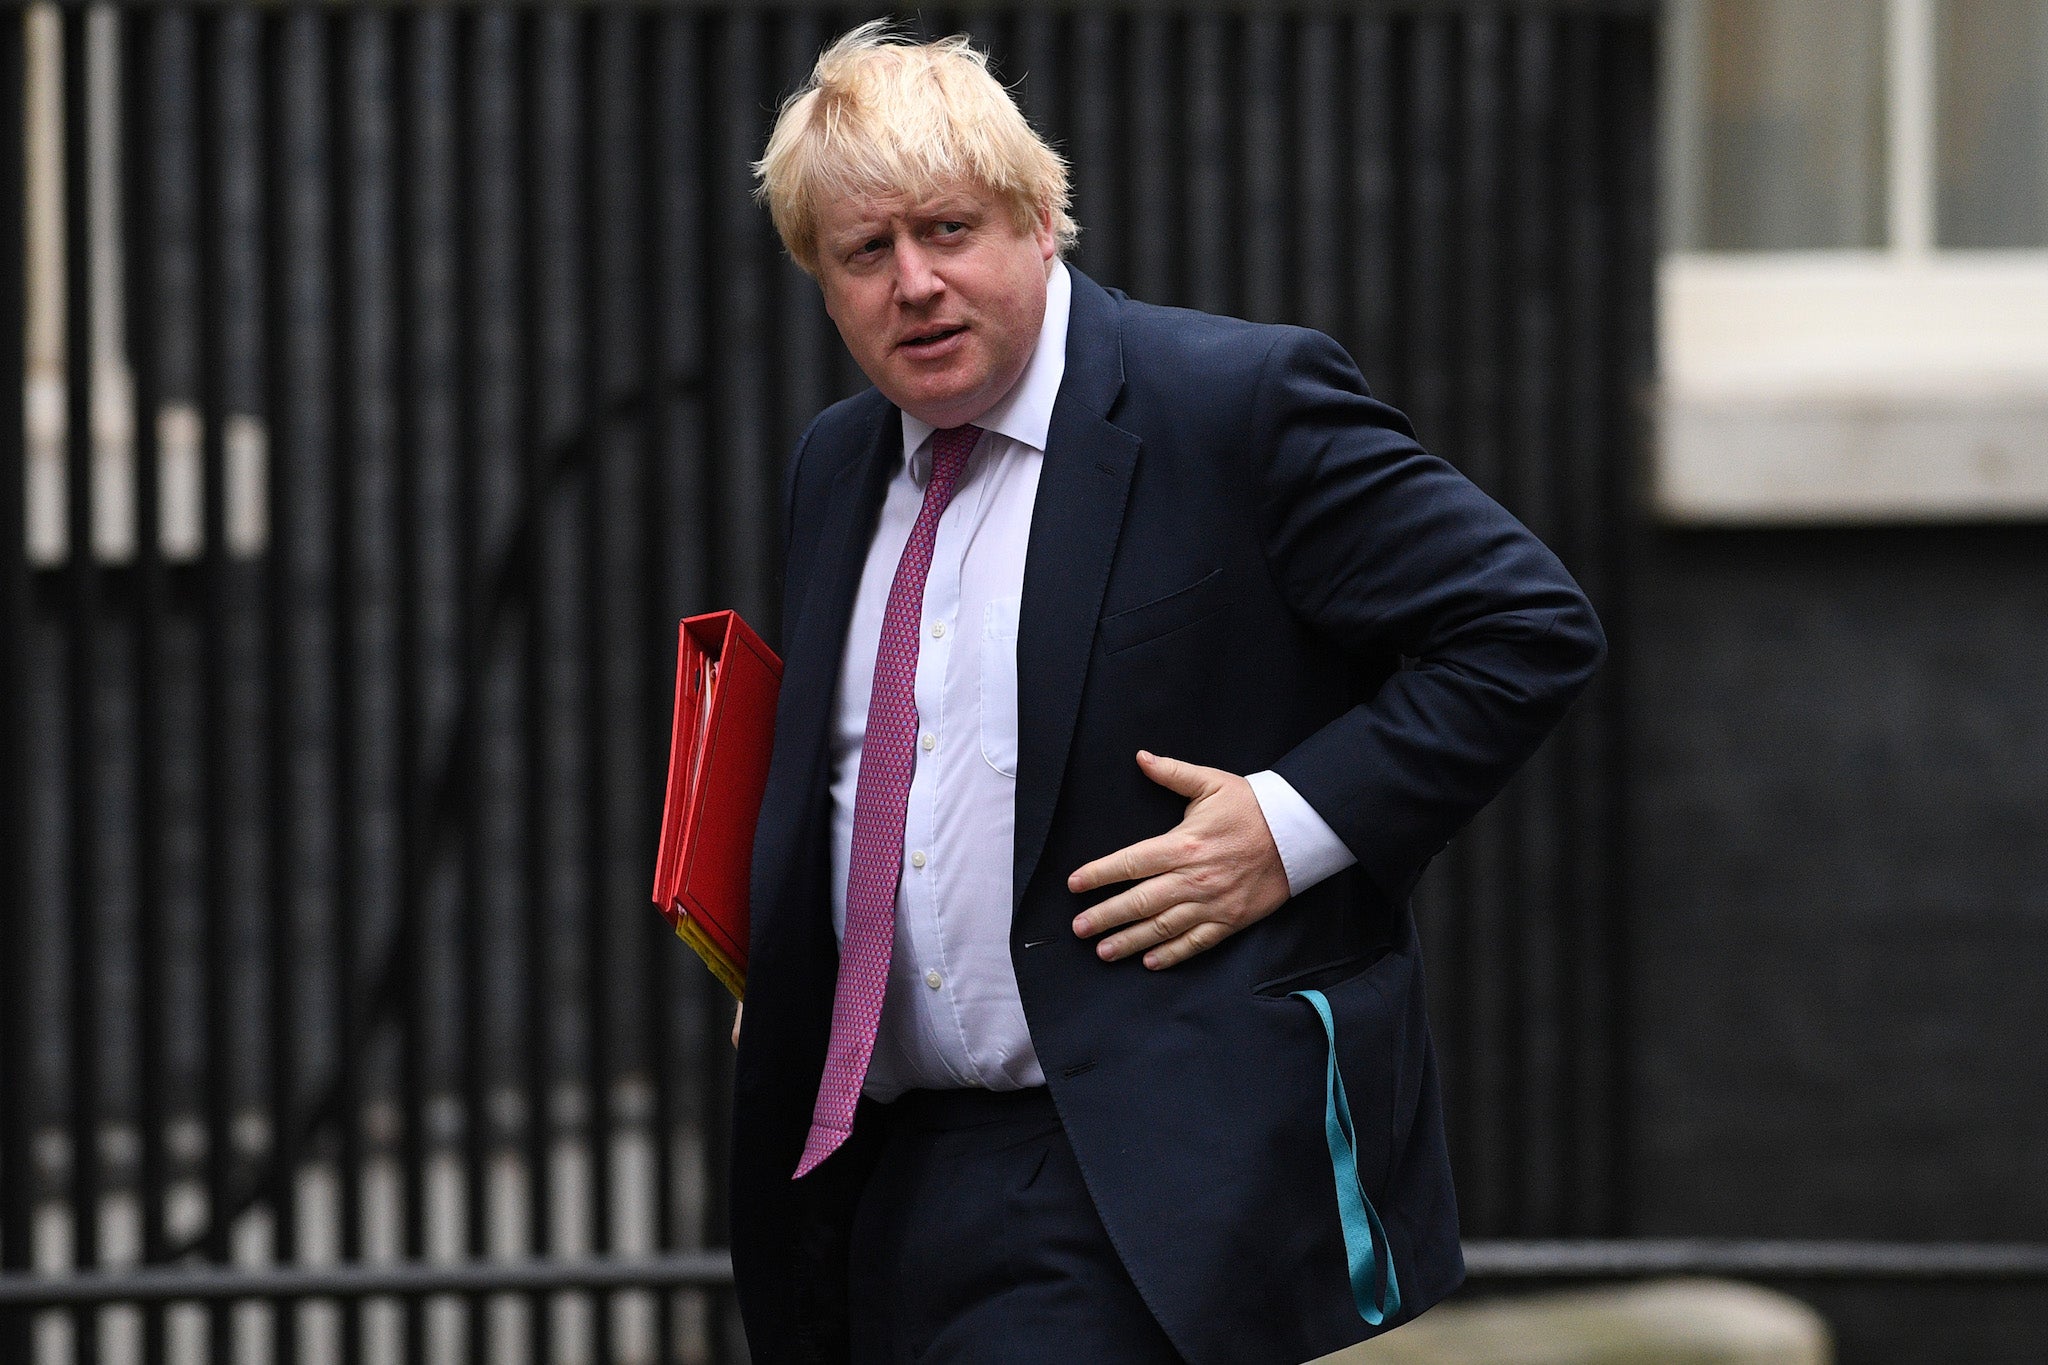 Boris Johnson arrives for the weekly cabinet meeting at 10 Downing Street in London on October 18, 2016